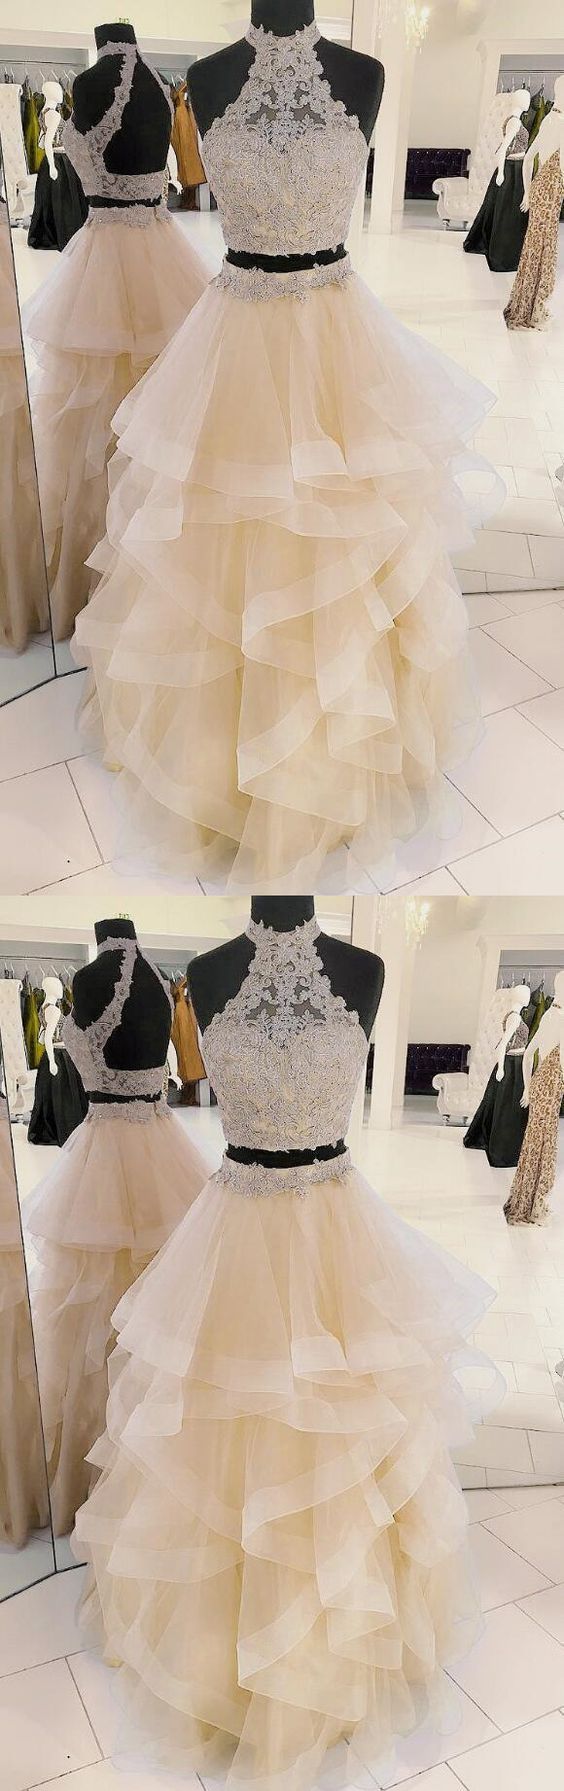 Halter Champagne Prom Dress, New Arrival Two-Piece Prom Dress, Cheap prom Dress, Beading Prom Dress, Tulle Long Prom/Evening Dress with Applique CD984